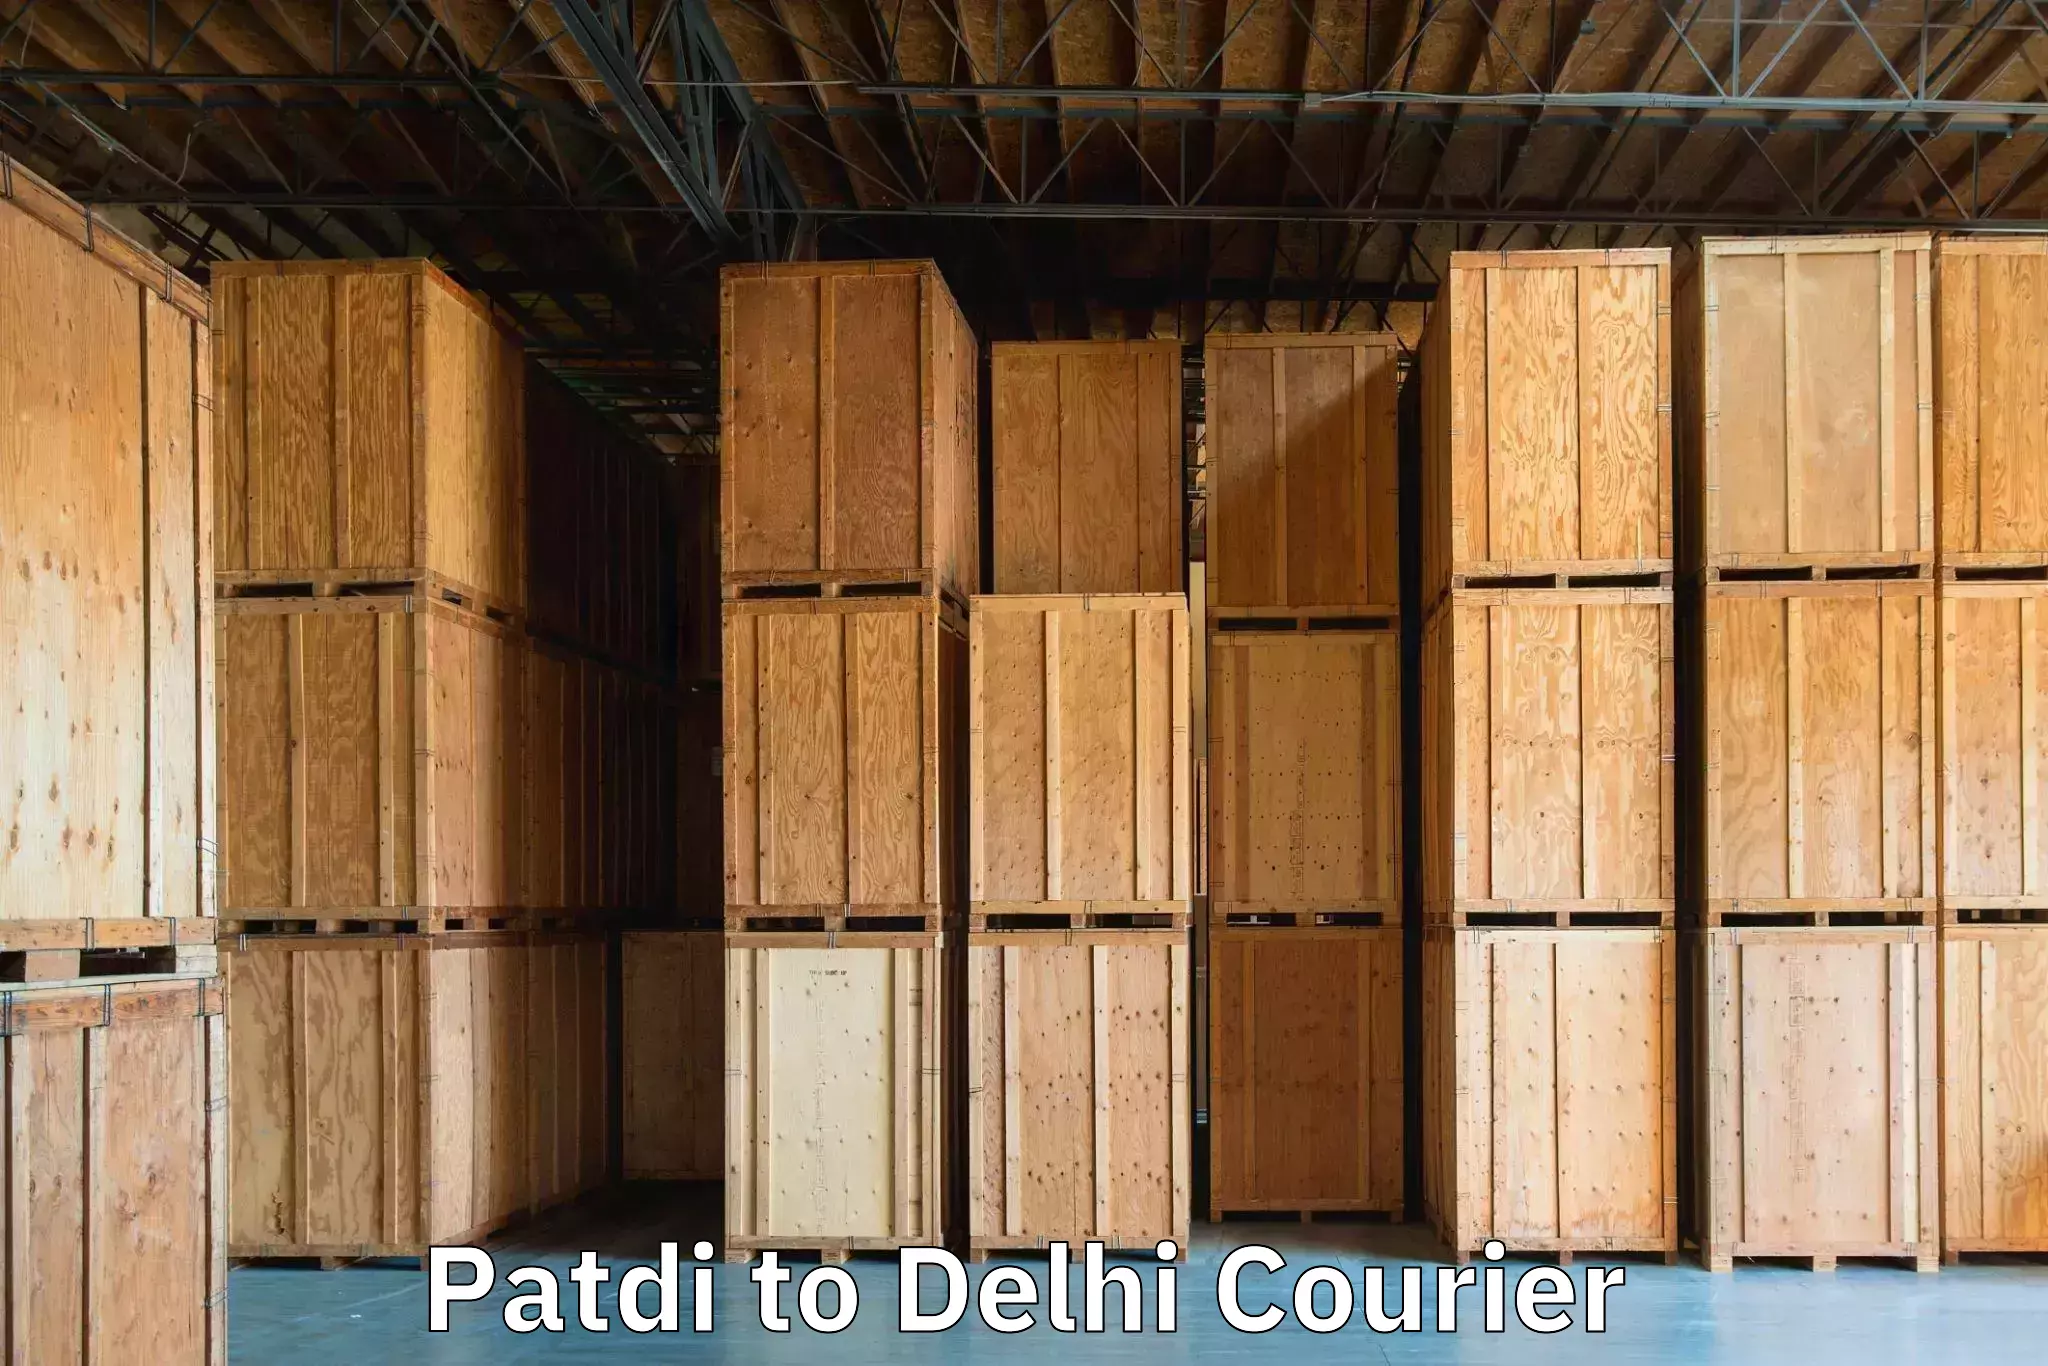 Express luggage delivery Patdi to University of Delhi